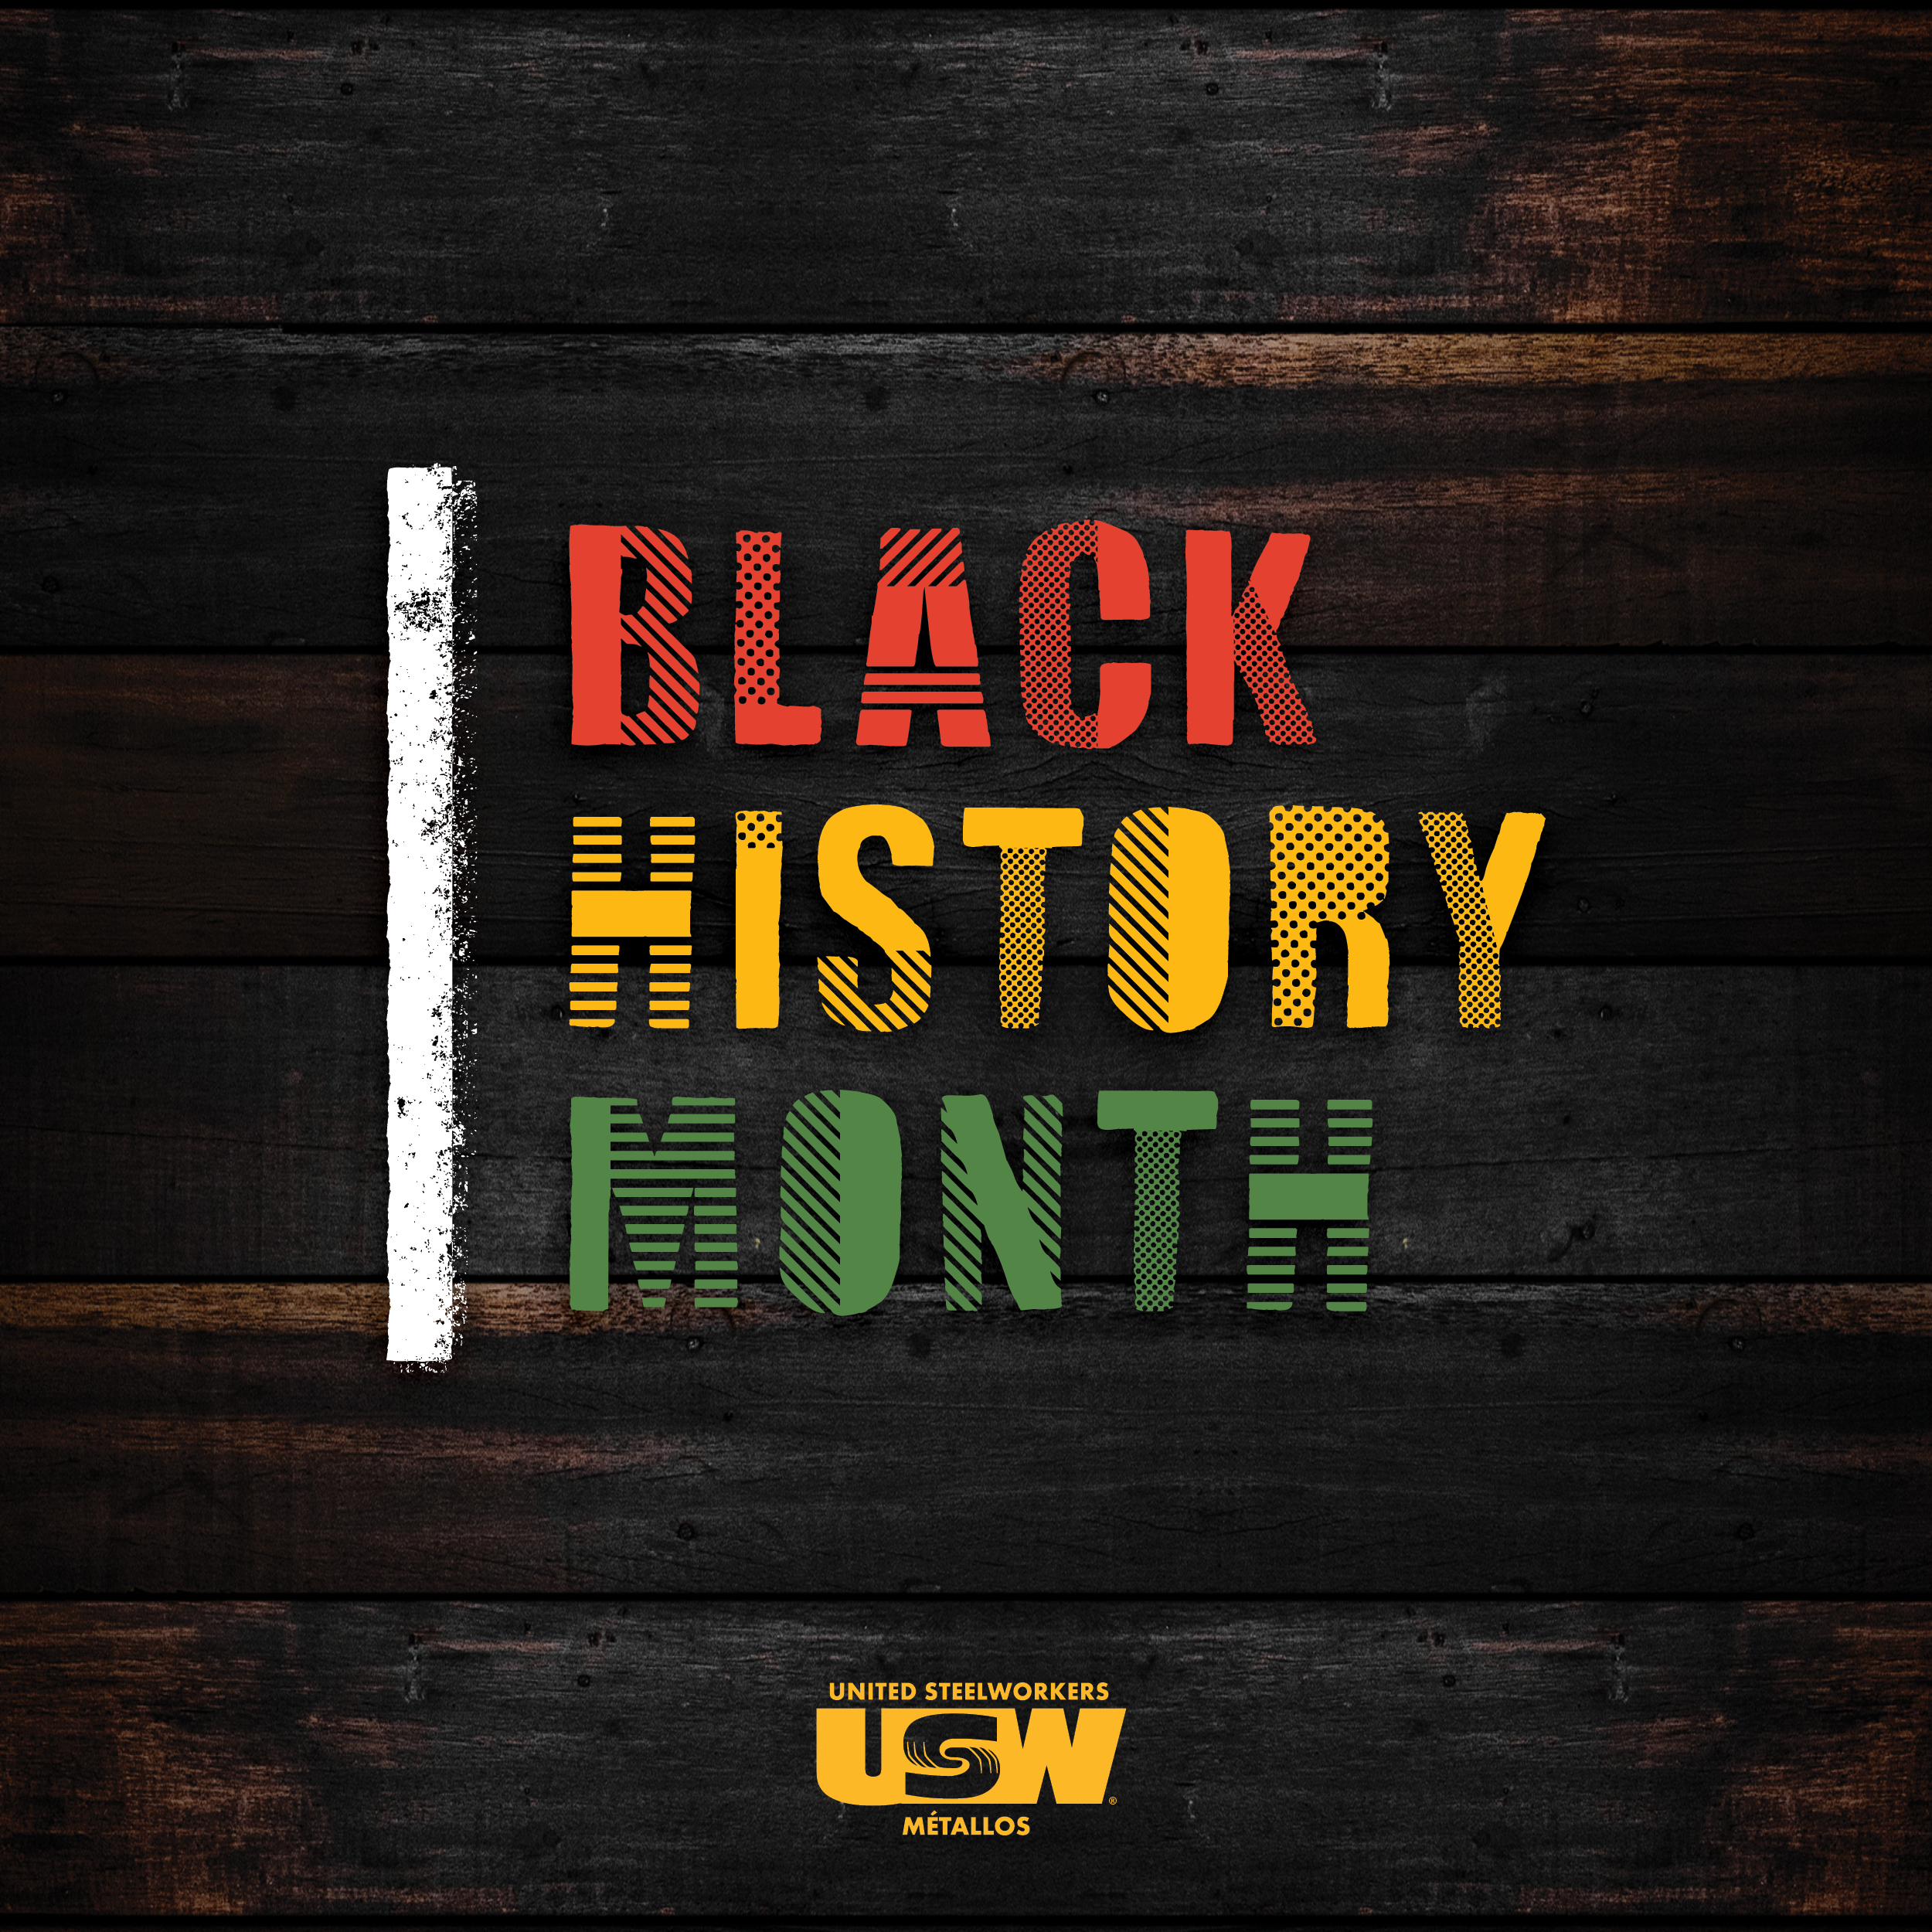 Image: Dark background with text that reads, "Black History Month" in red, yellow and green. USW logo at the bottom.